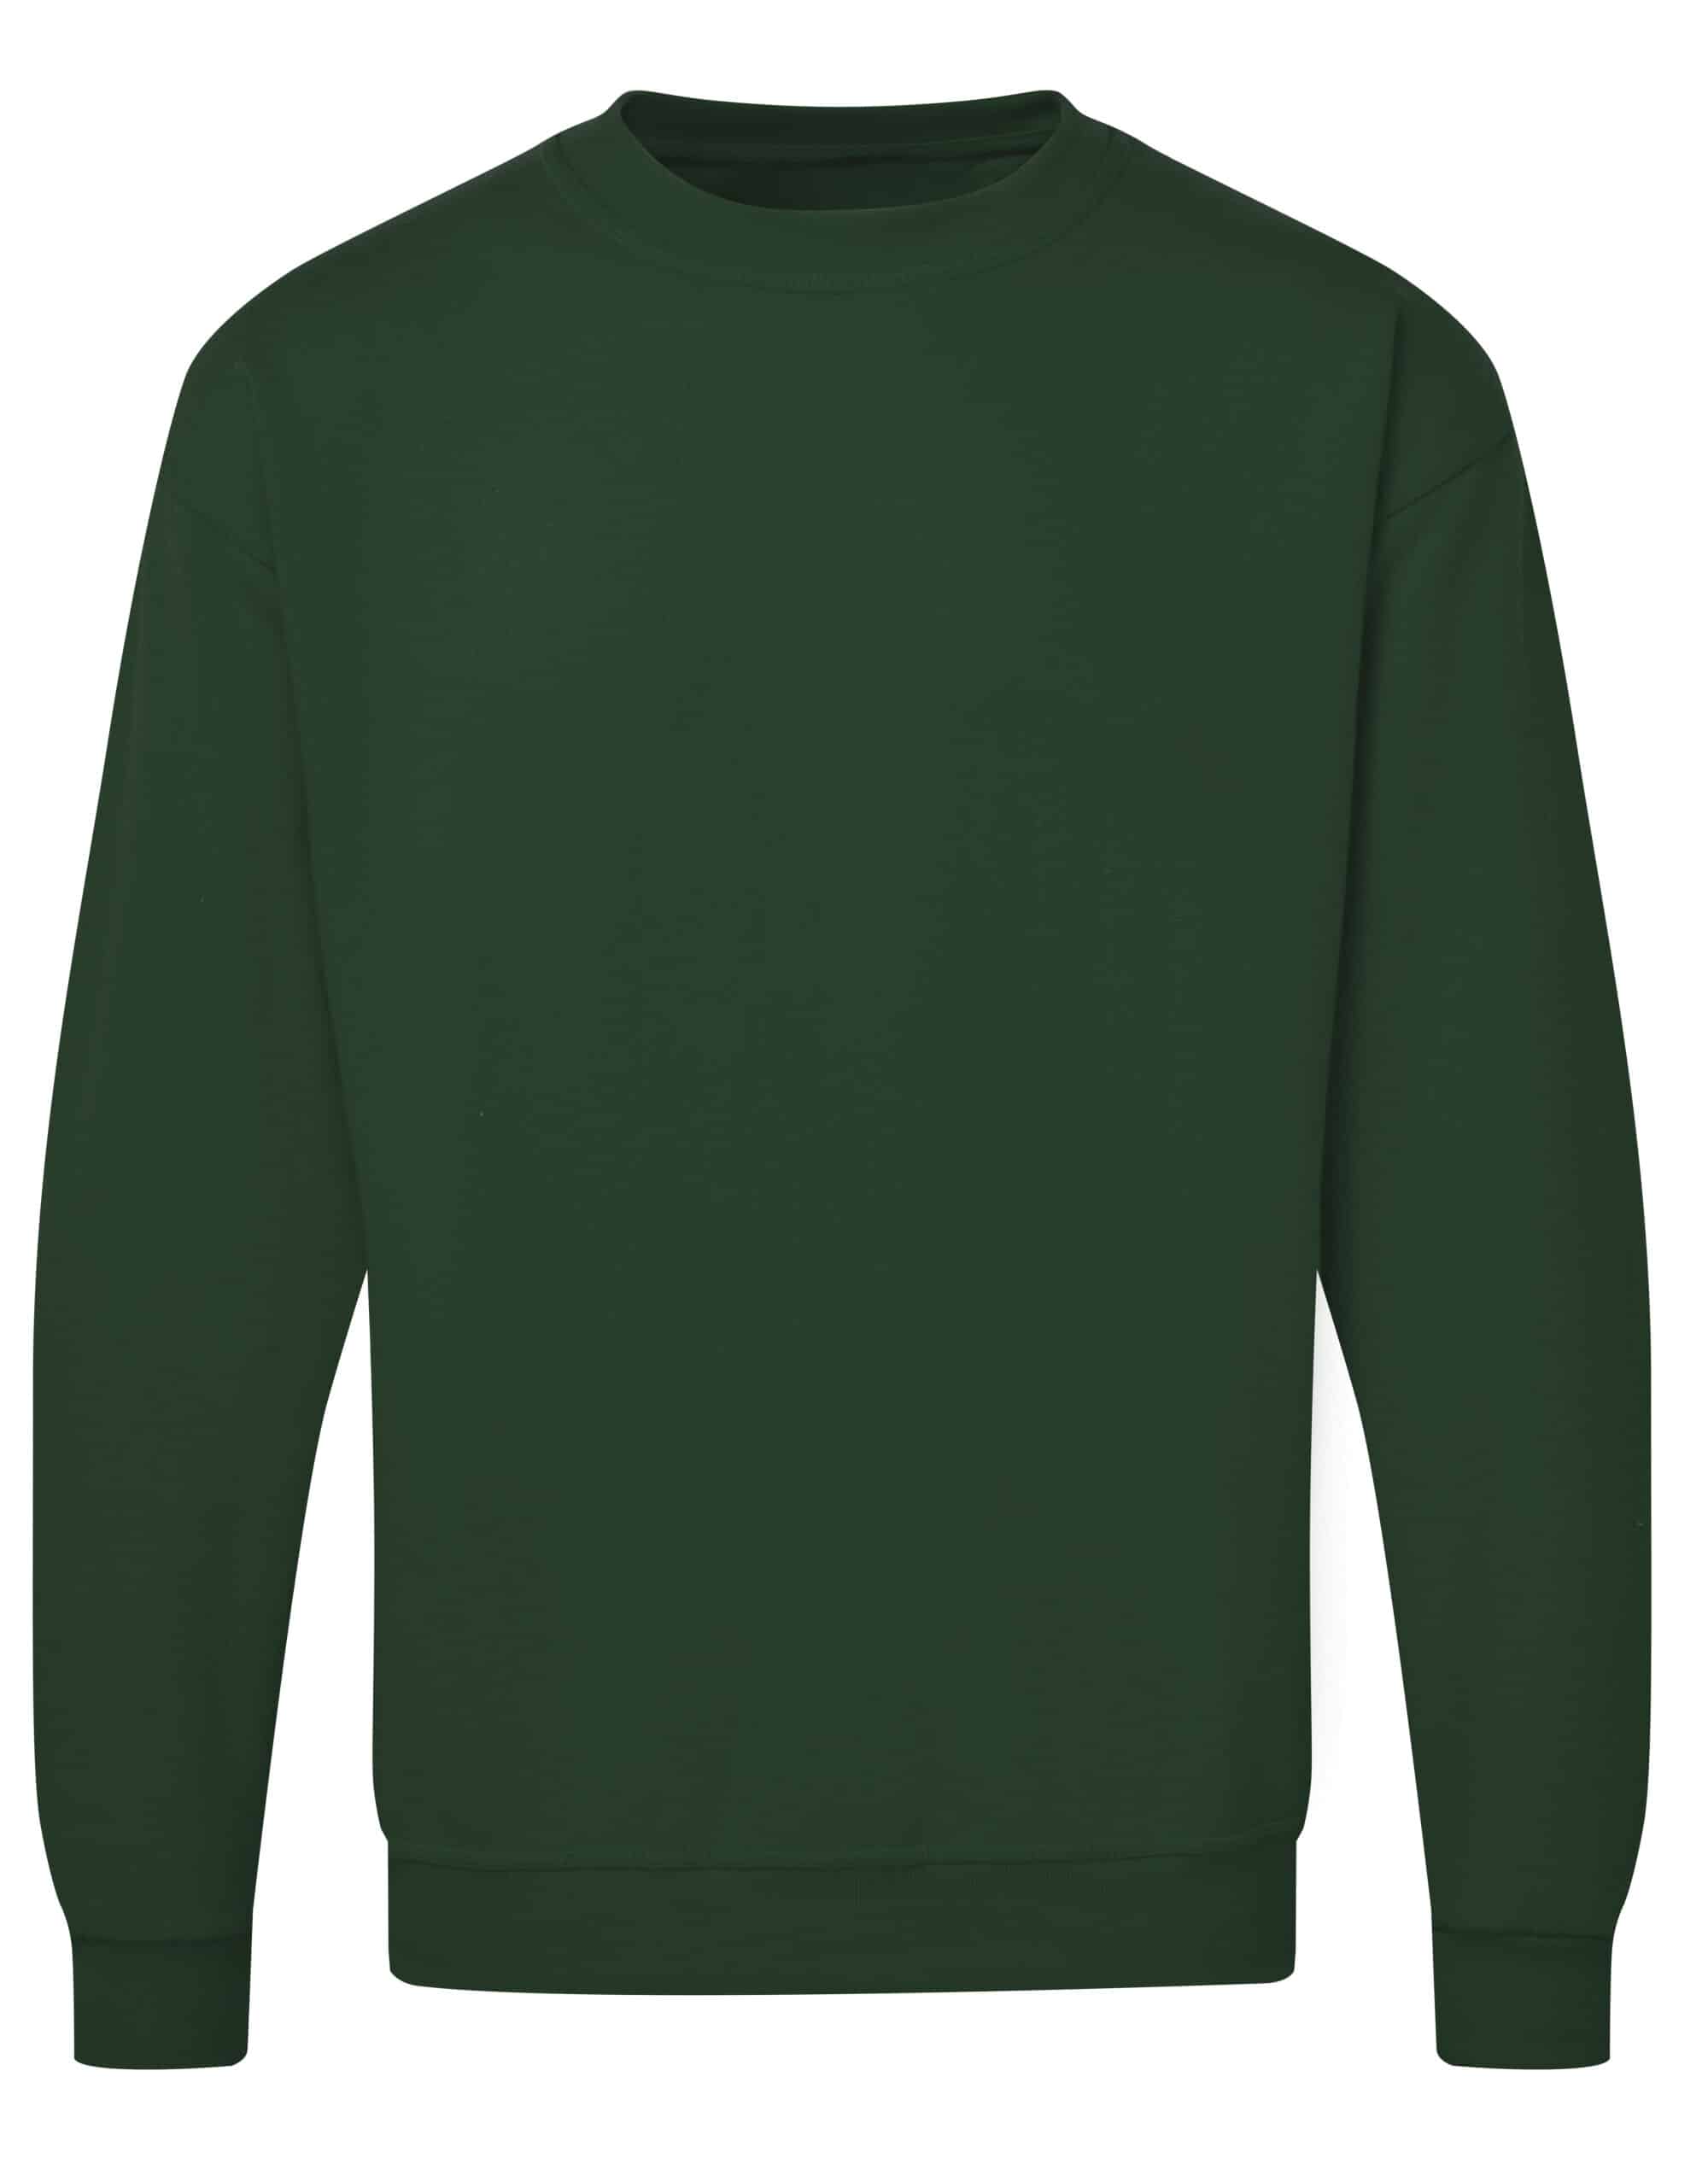 UCC002 Heavyweight UCC Sweatshirt - various colours | Provincial Safety